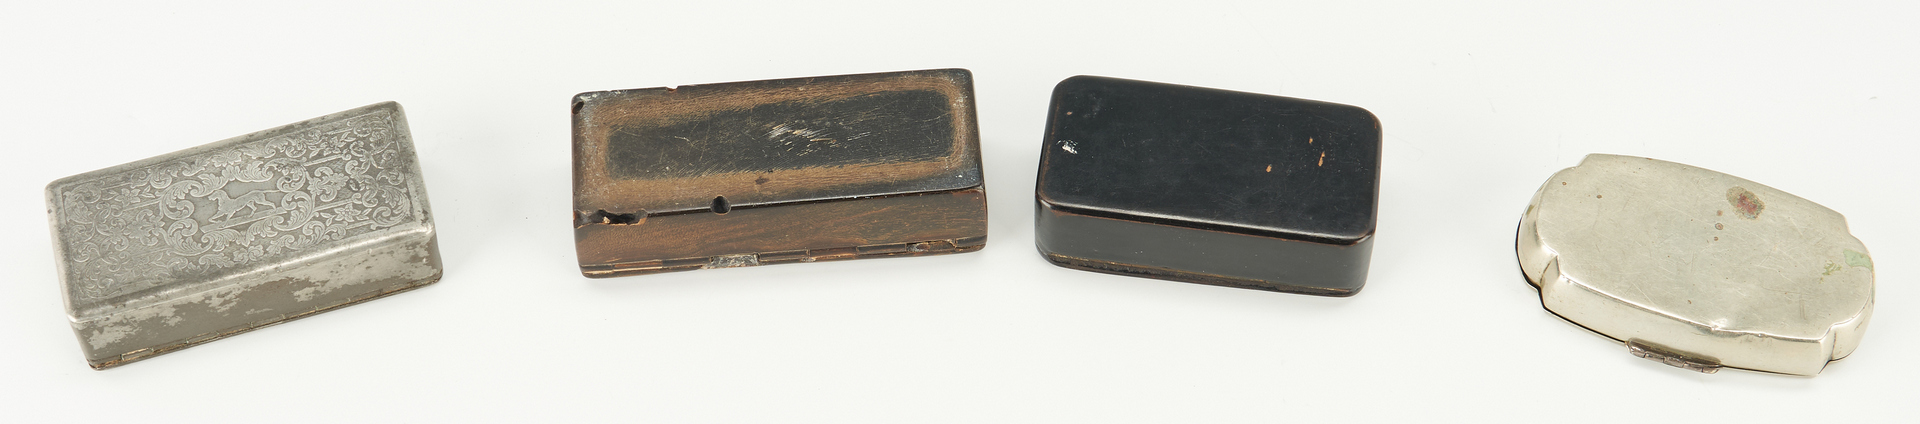 Lot 241: 10 Snuff, Tobacco & Spice Boxes, Various Materials